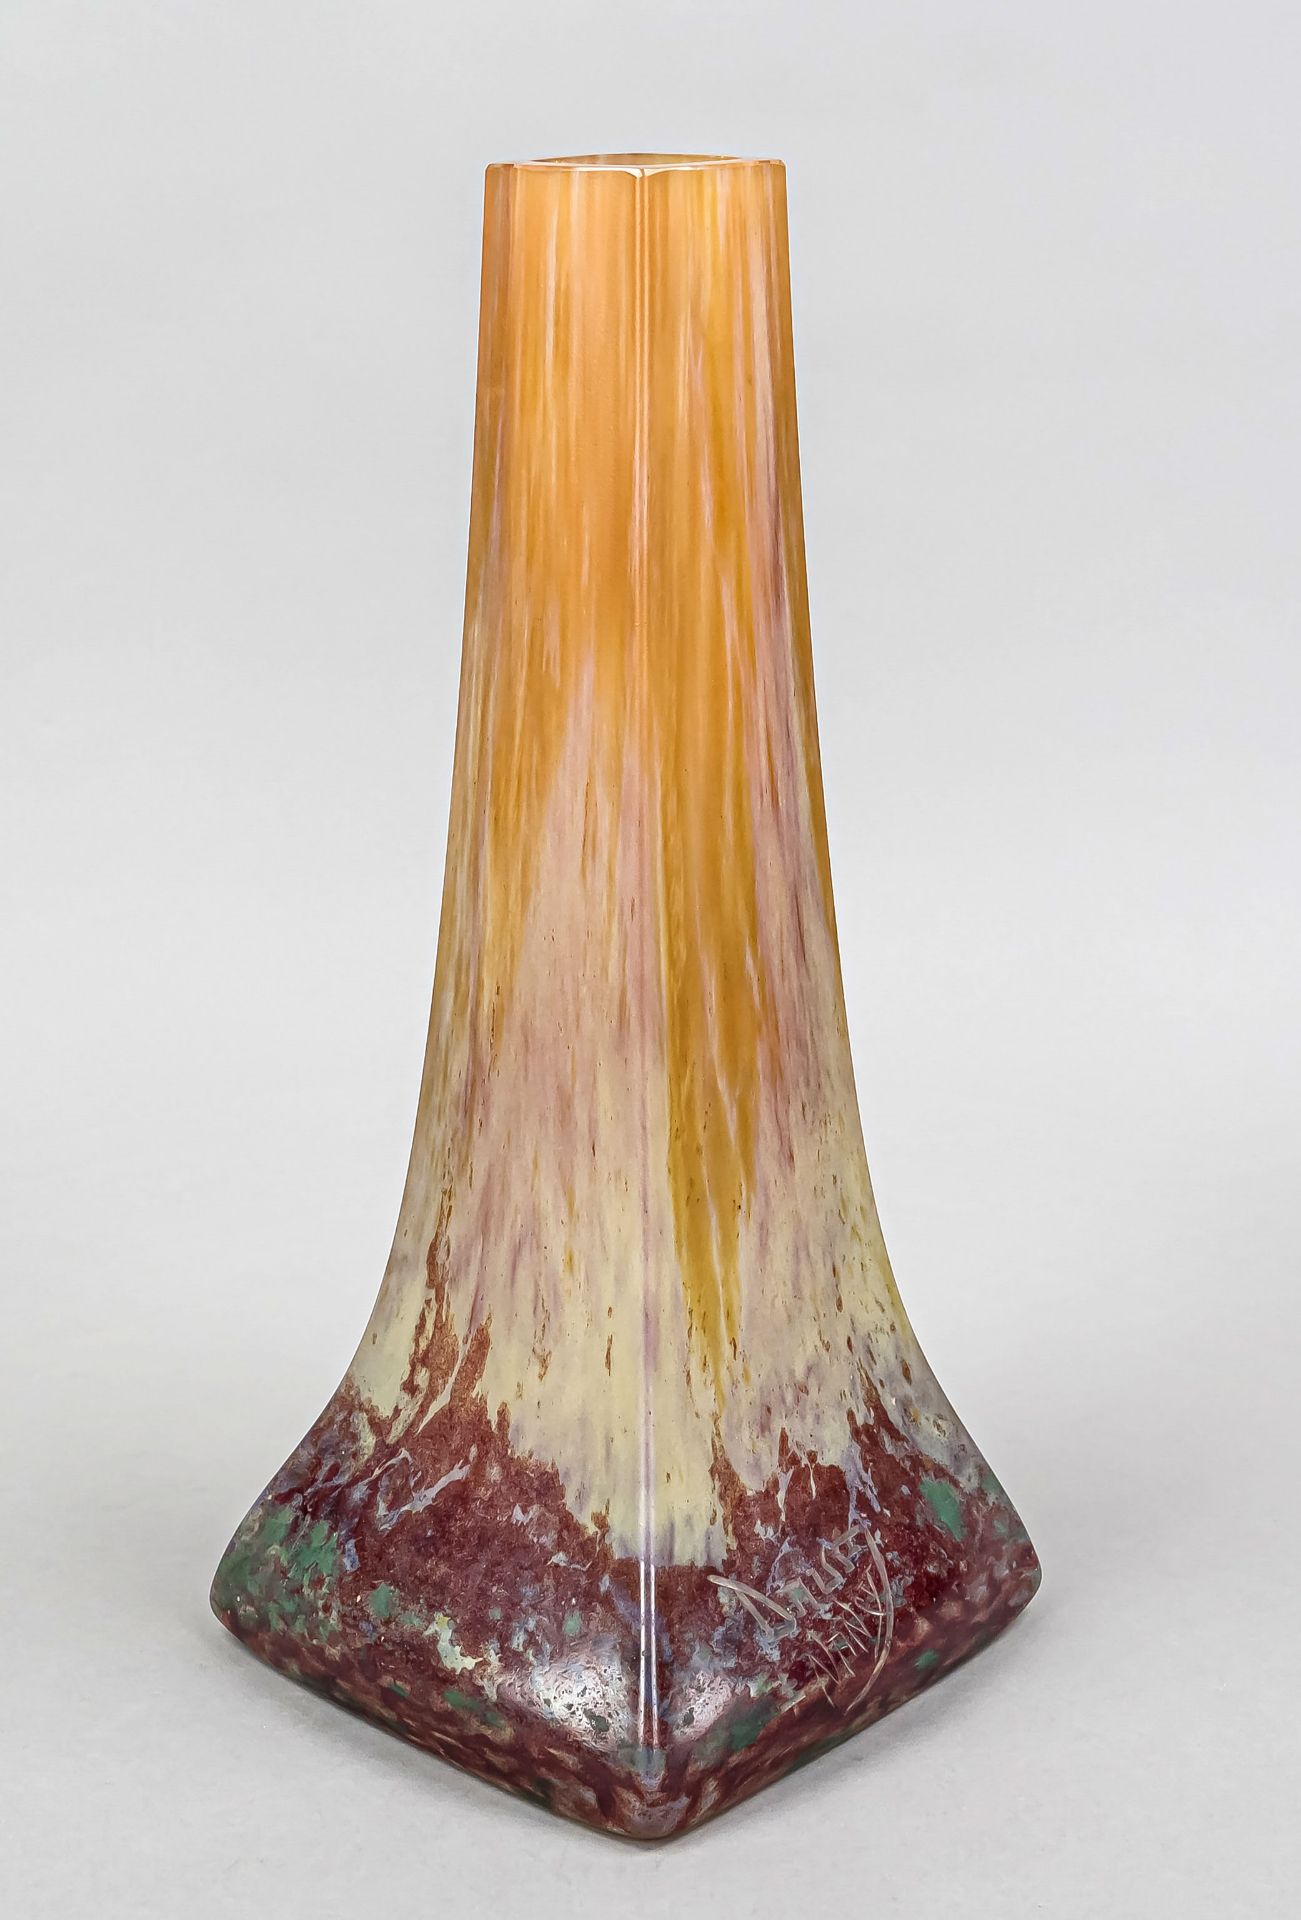 Pole vase, France, early 20th century, Daum Nancy, square base, angular body with tapering wall,